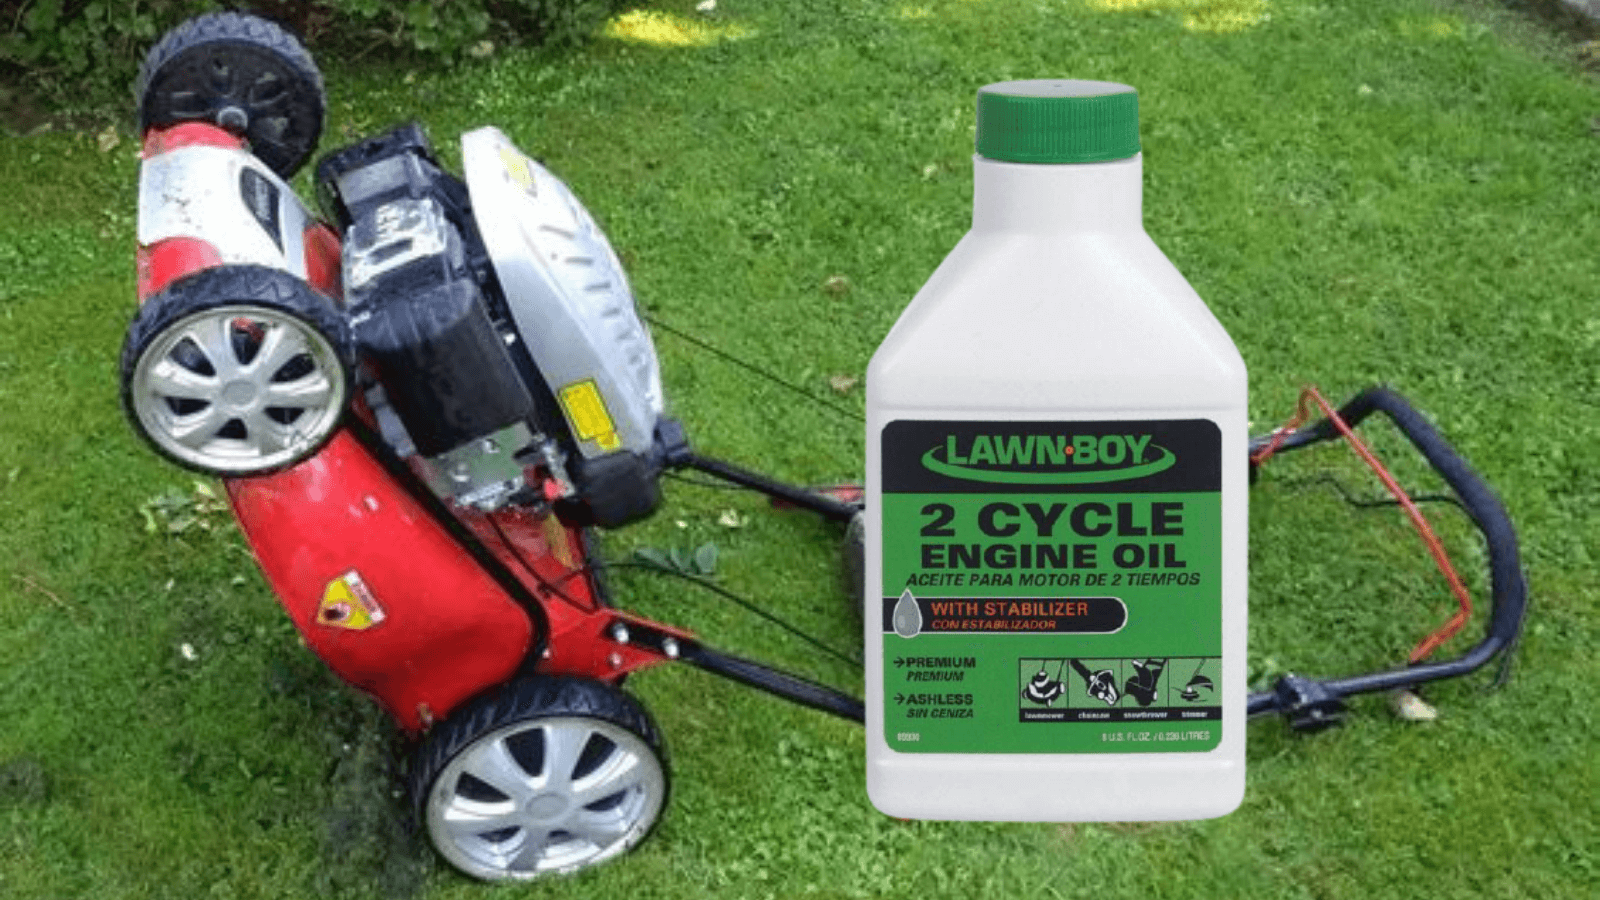 Can You Use 2 Cycle Oil In A Lawn Mower?